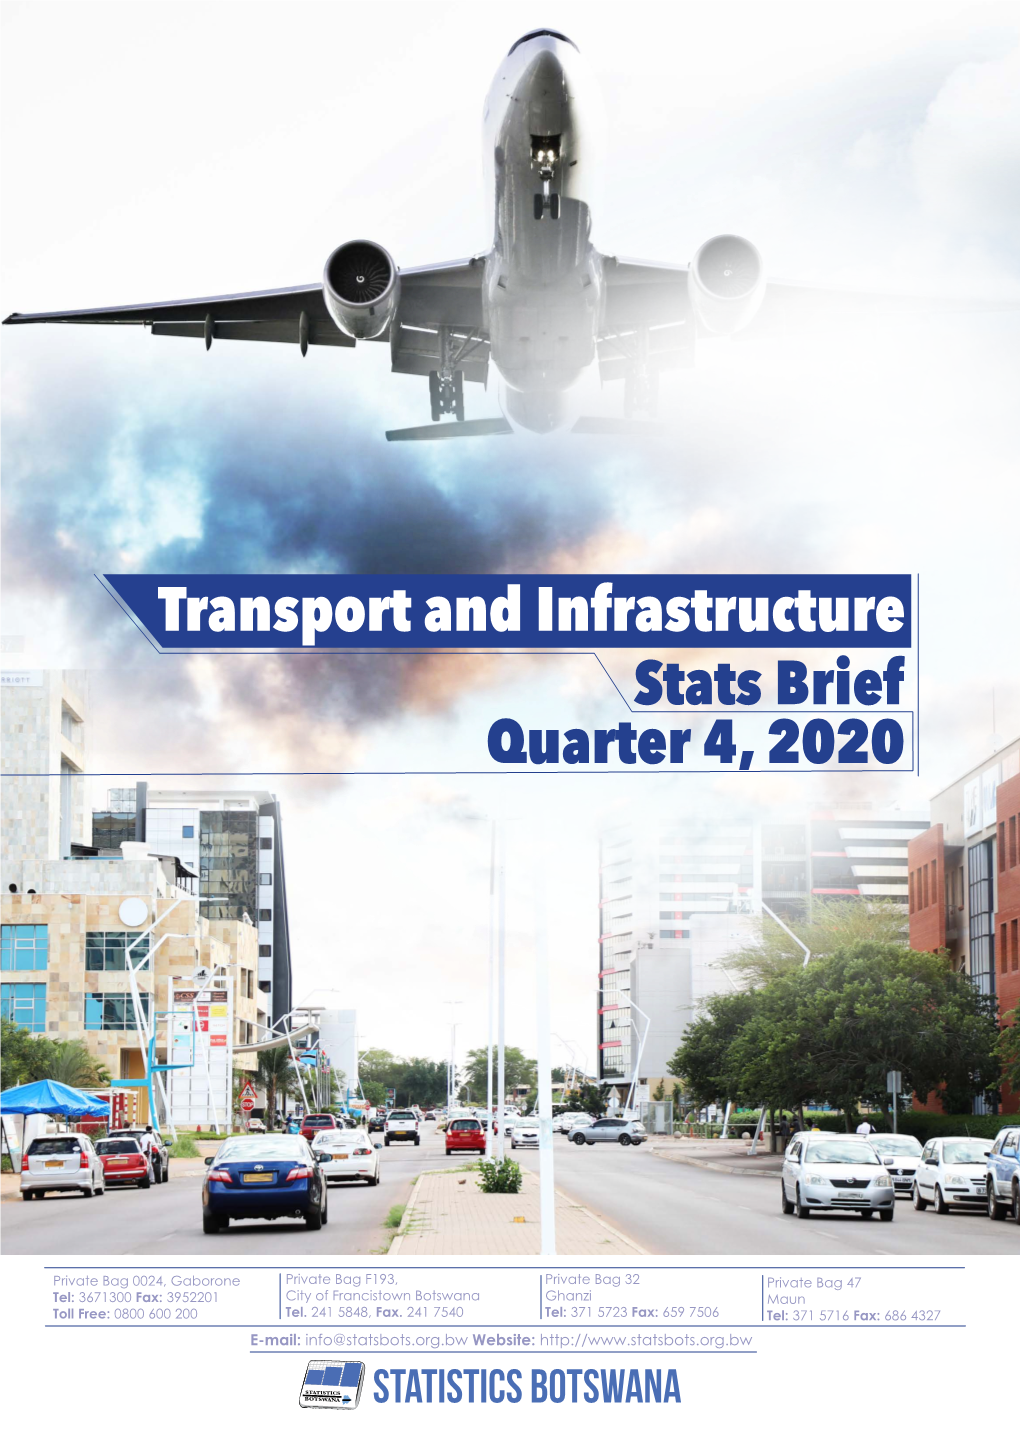 Transport and Infrastructure Stats Brief Quarter 4, 2020